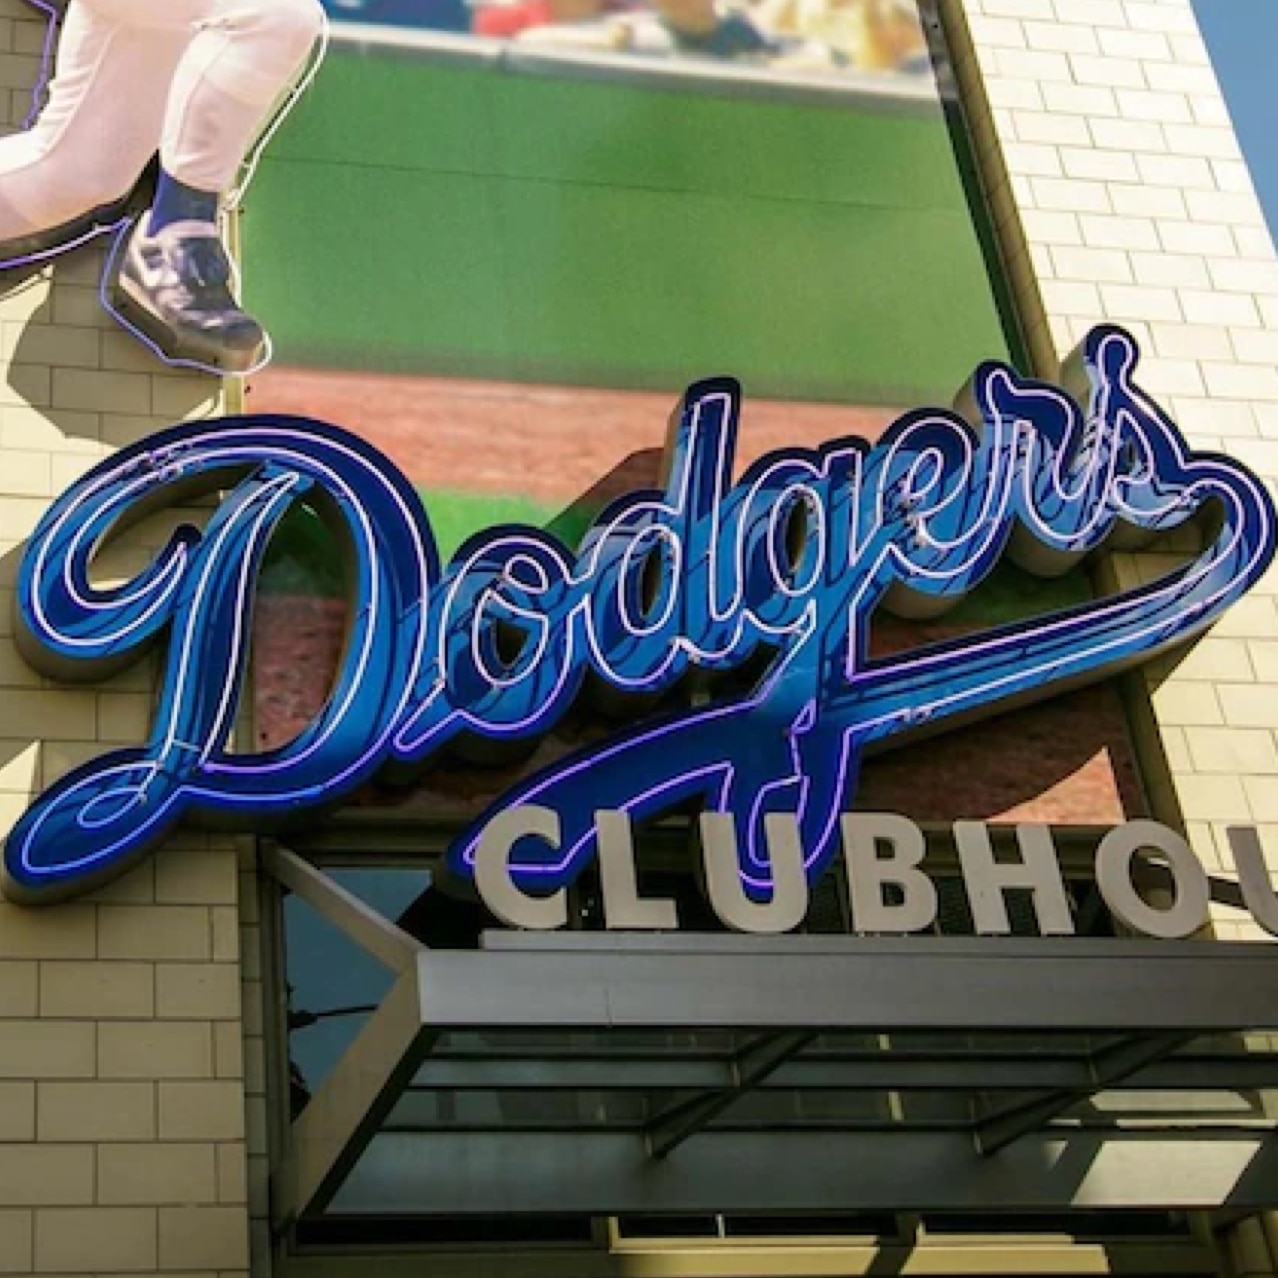 Dodgers Clubhouse Store